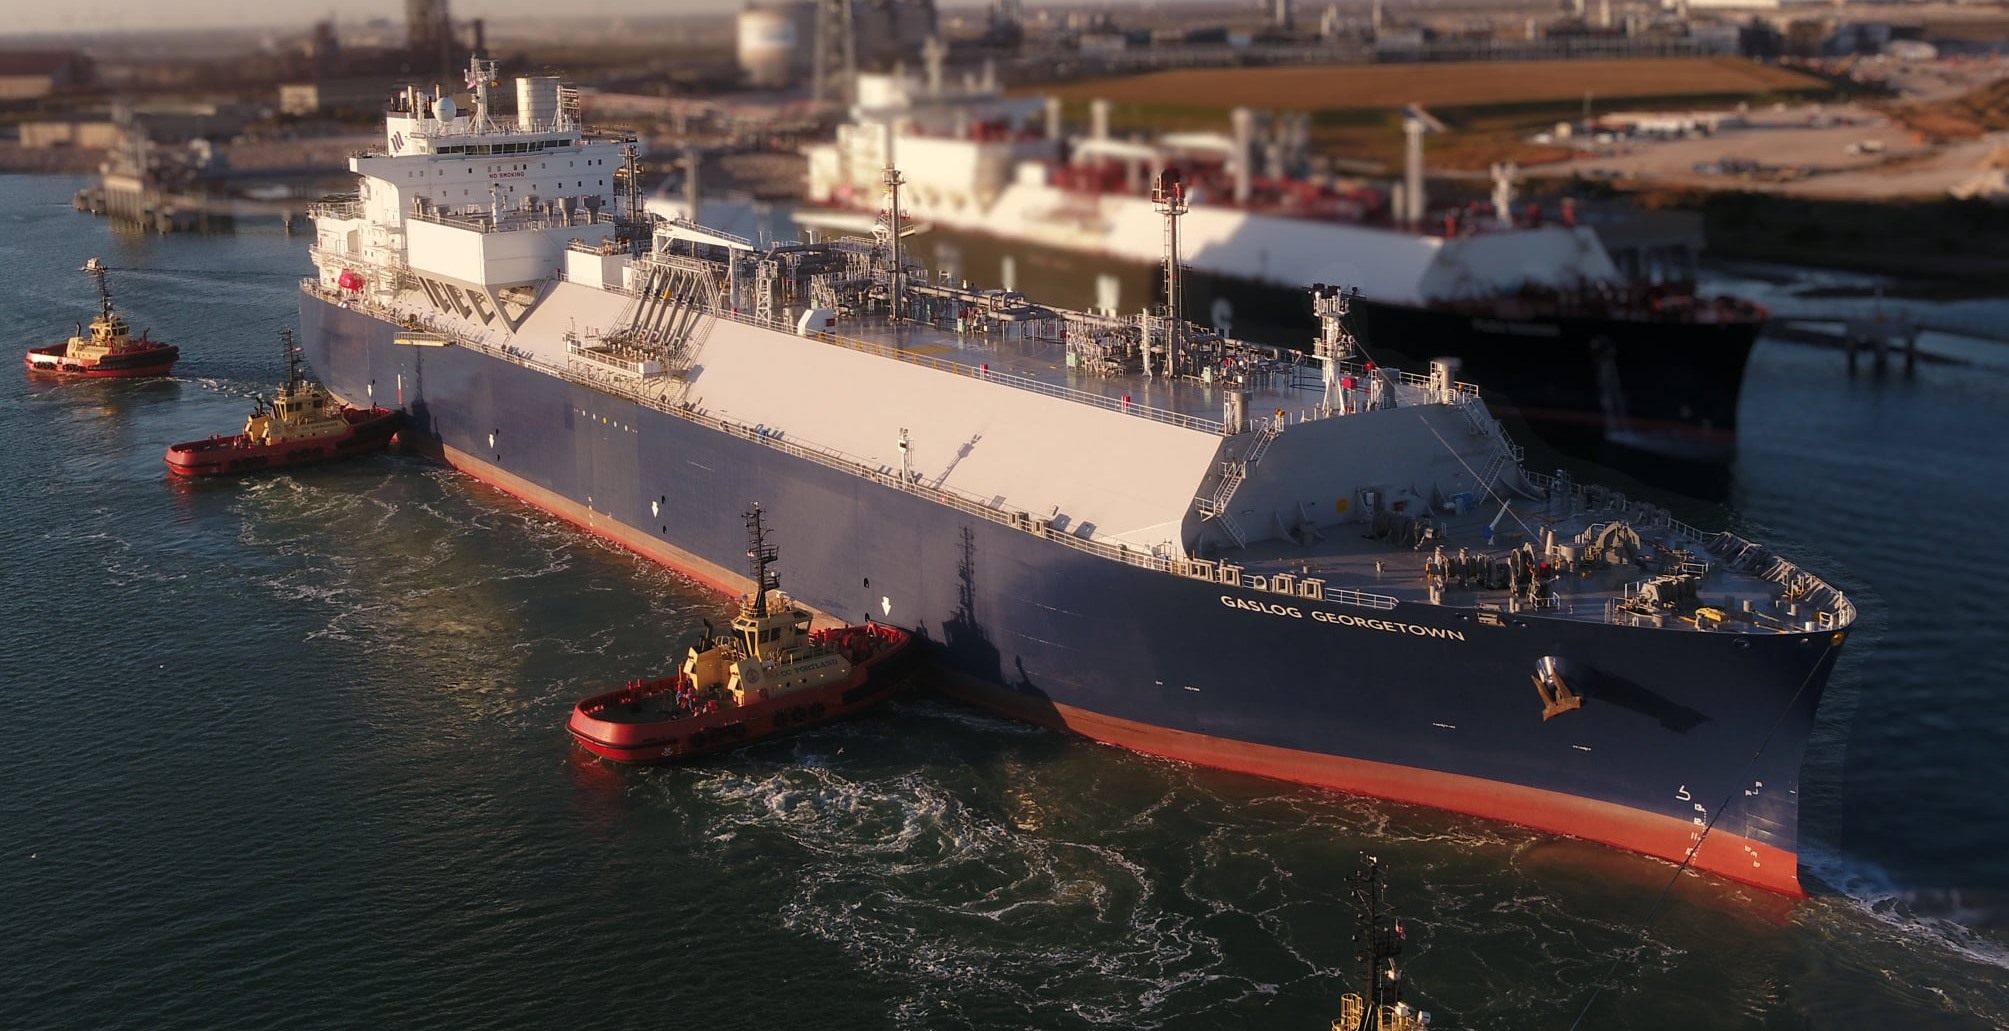 EIA: US weekly LNG exports fall, Henry Hub spot price rises